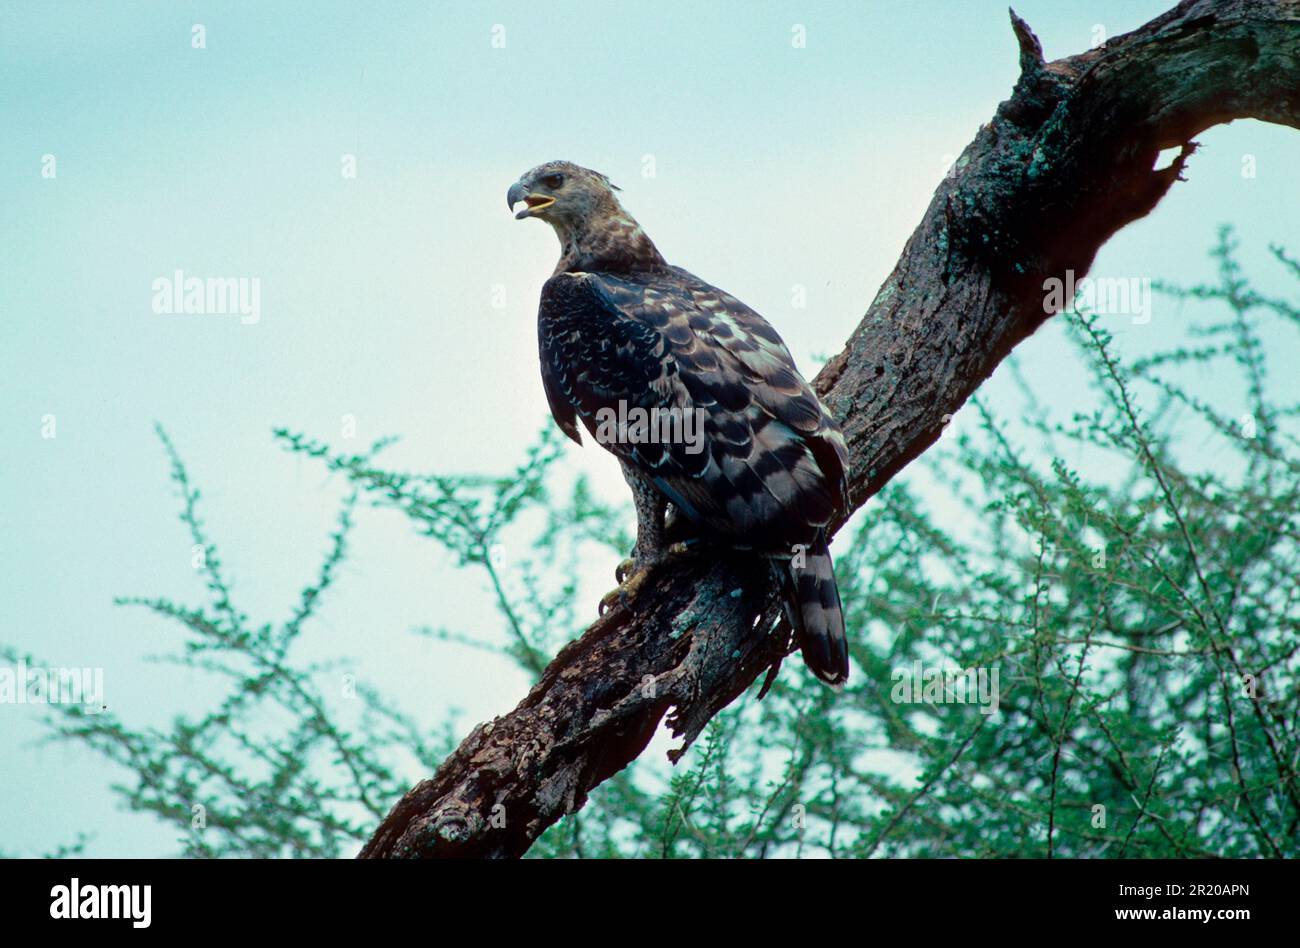 Crowned crowned eagle (Stephanoaetus coronatus) On branch, calling, 2-3 years old Stock Photo